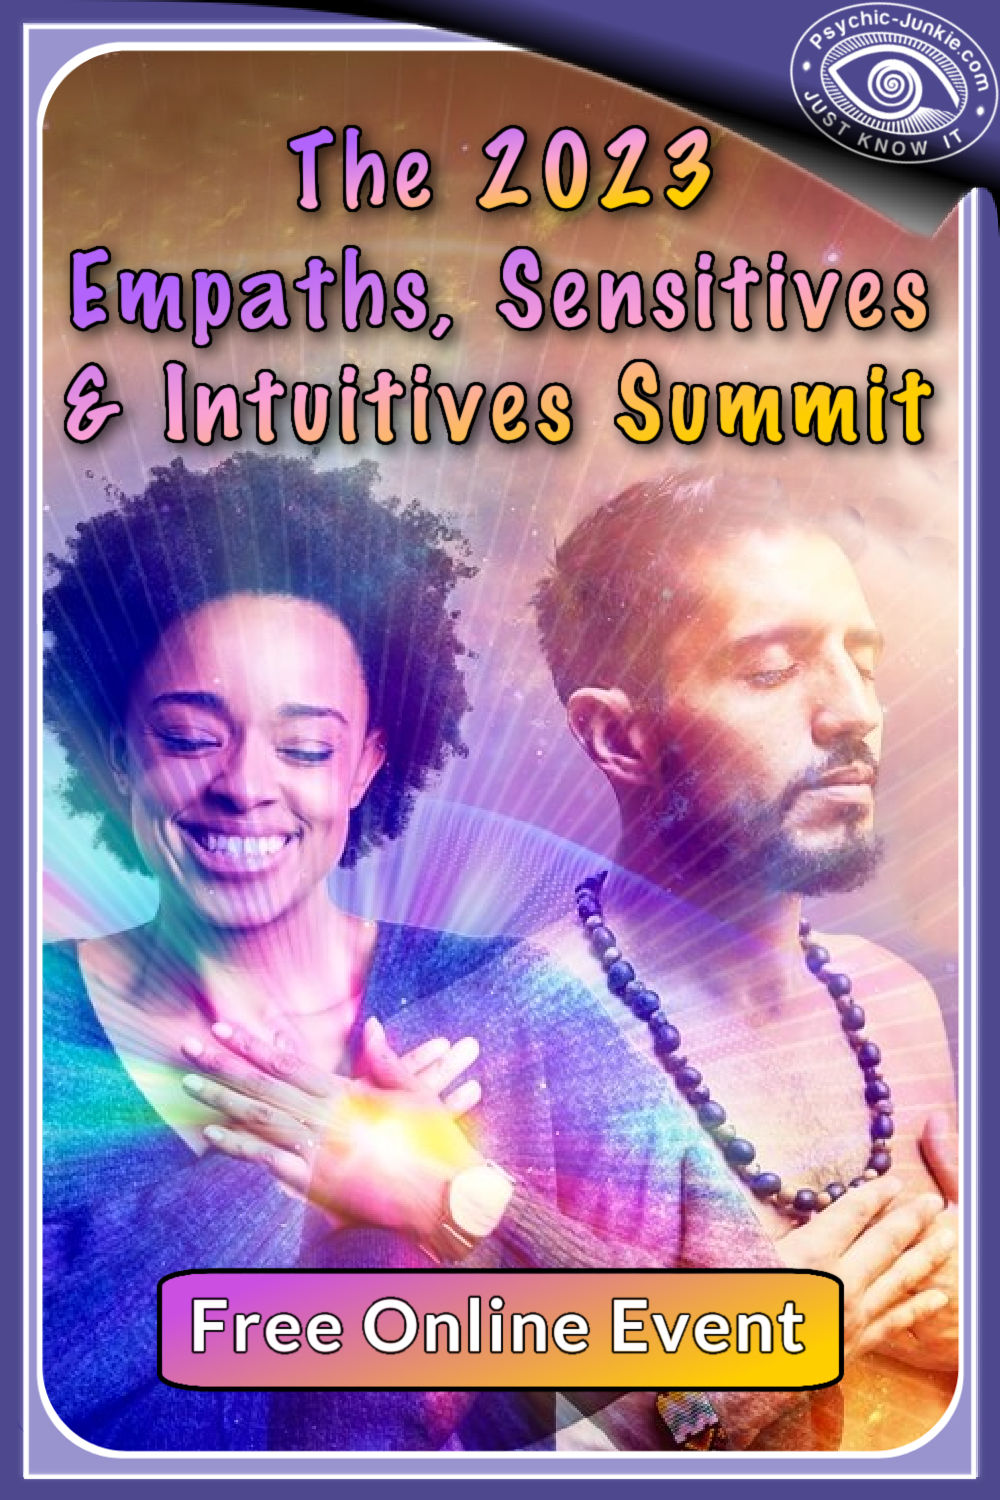 RSVP here for this Body Mind Spirit Summit - at no charge